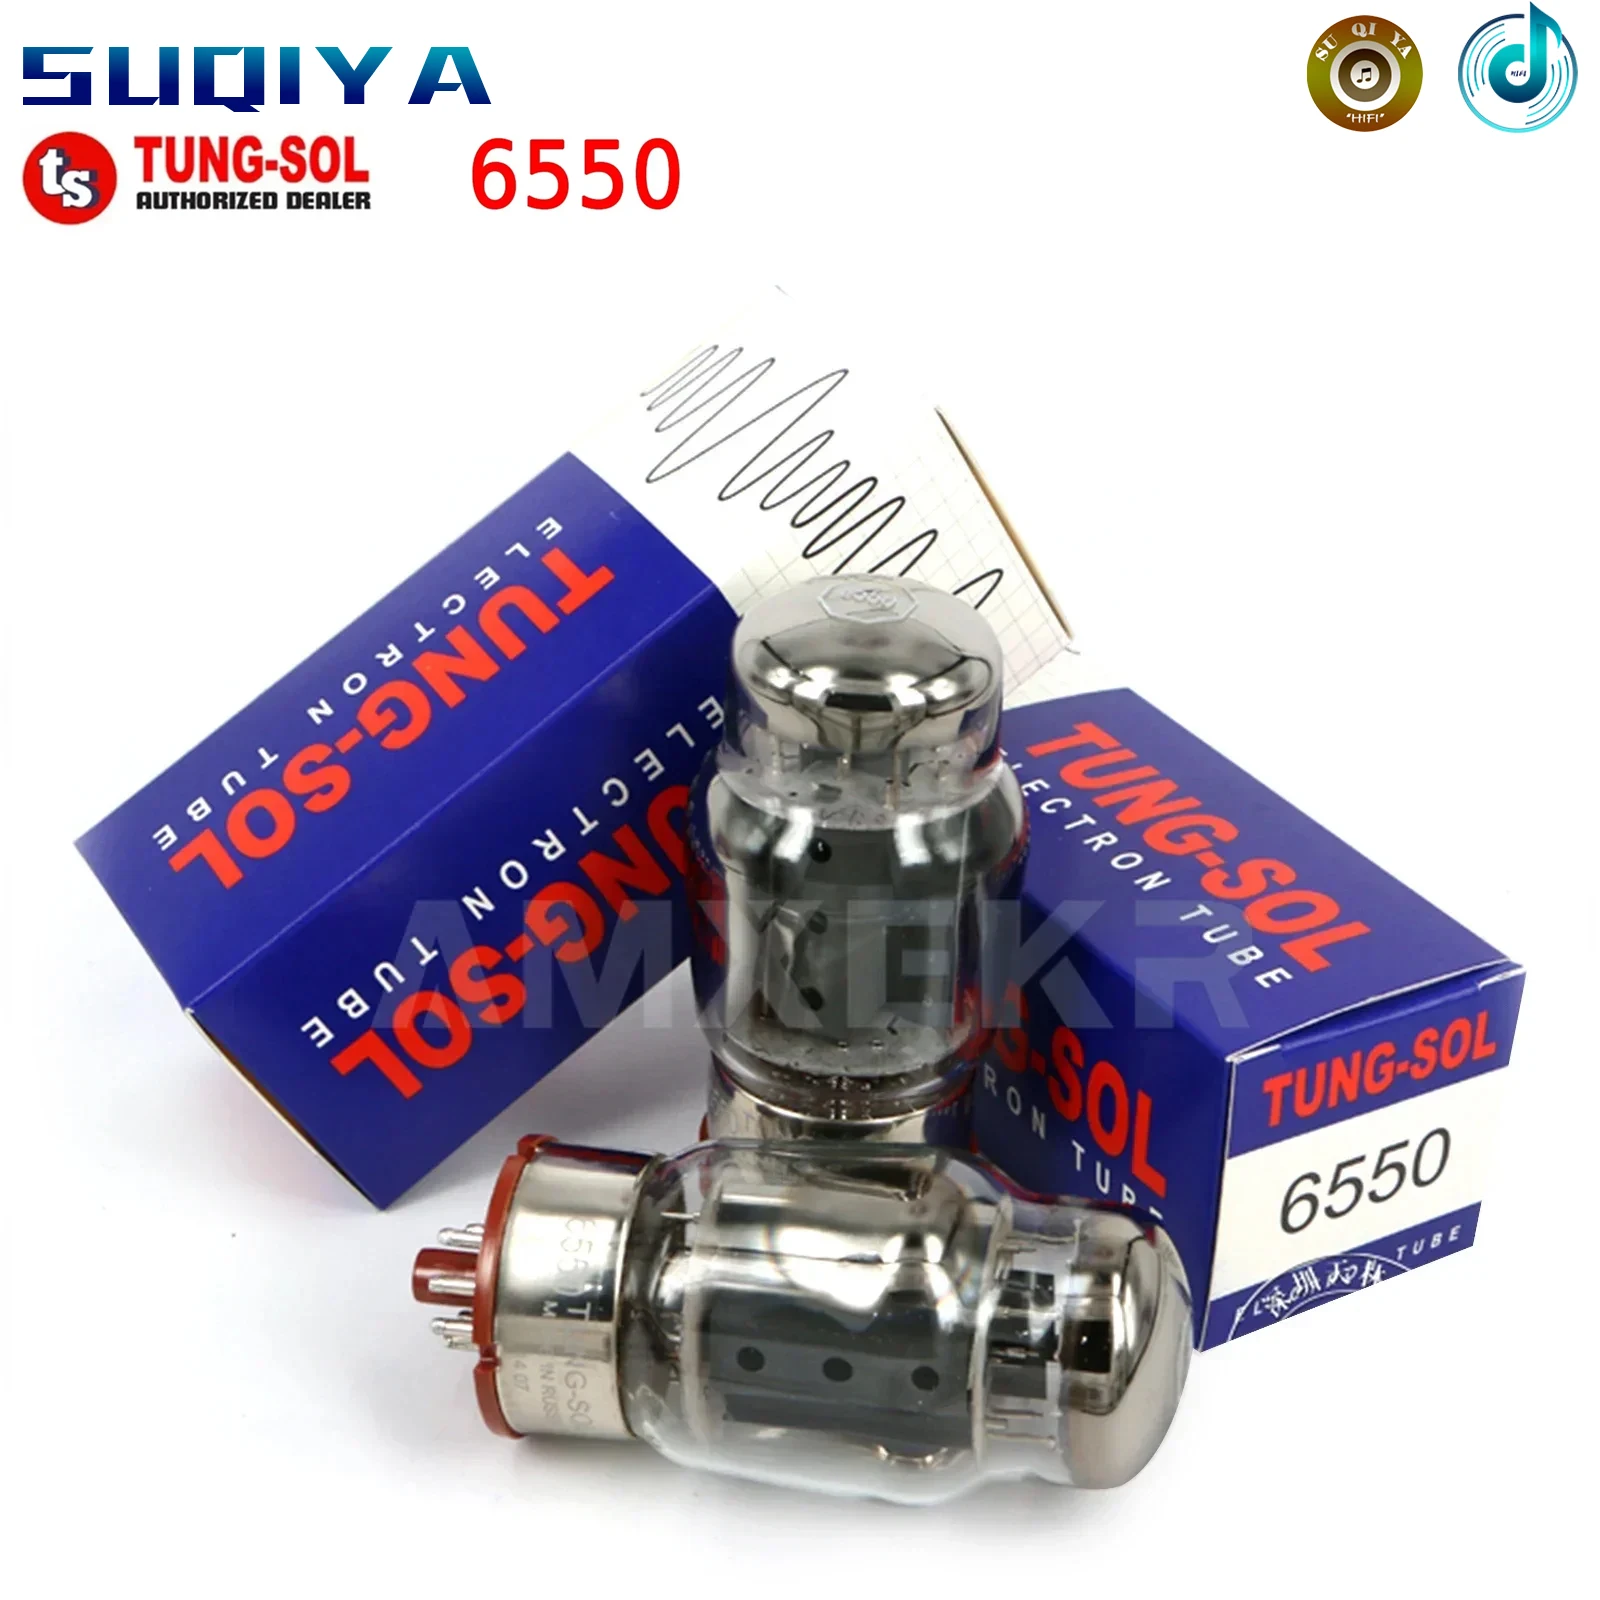 

TUNG-SOL 6550 Vacuum Tube HIFI Audio Valve Replaces KT88 KT120 KT100 Electronic Tube Amplifier Kit Diy Matched Quad